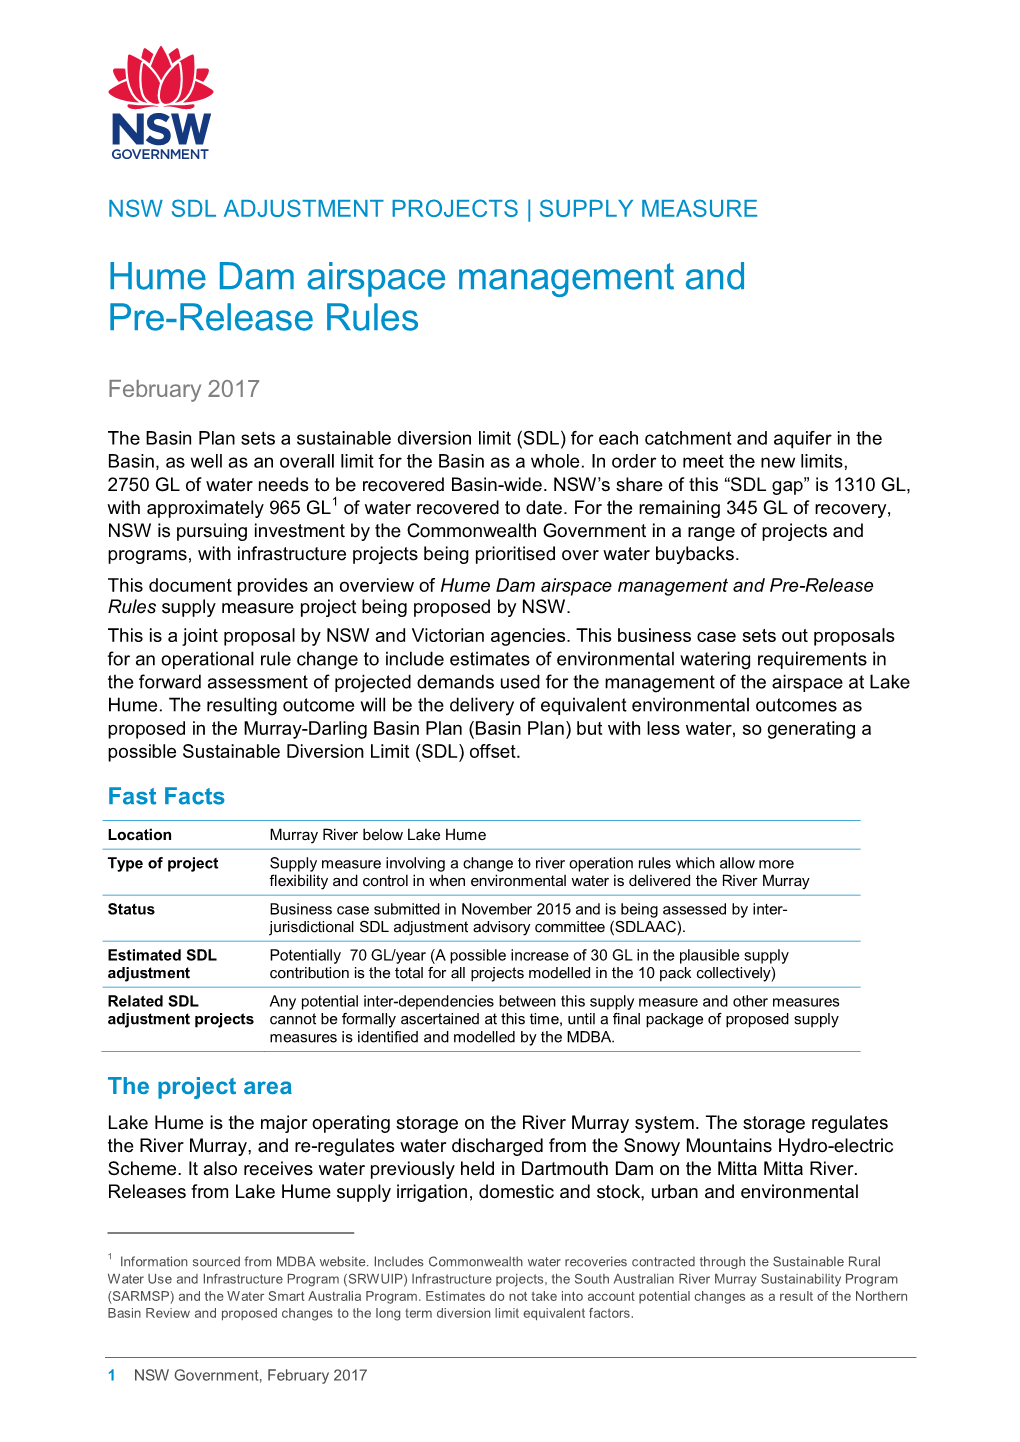 Hume Dam Airspace Management and Pre Releases